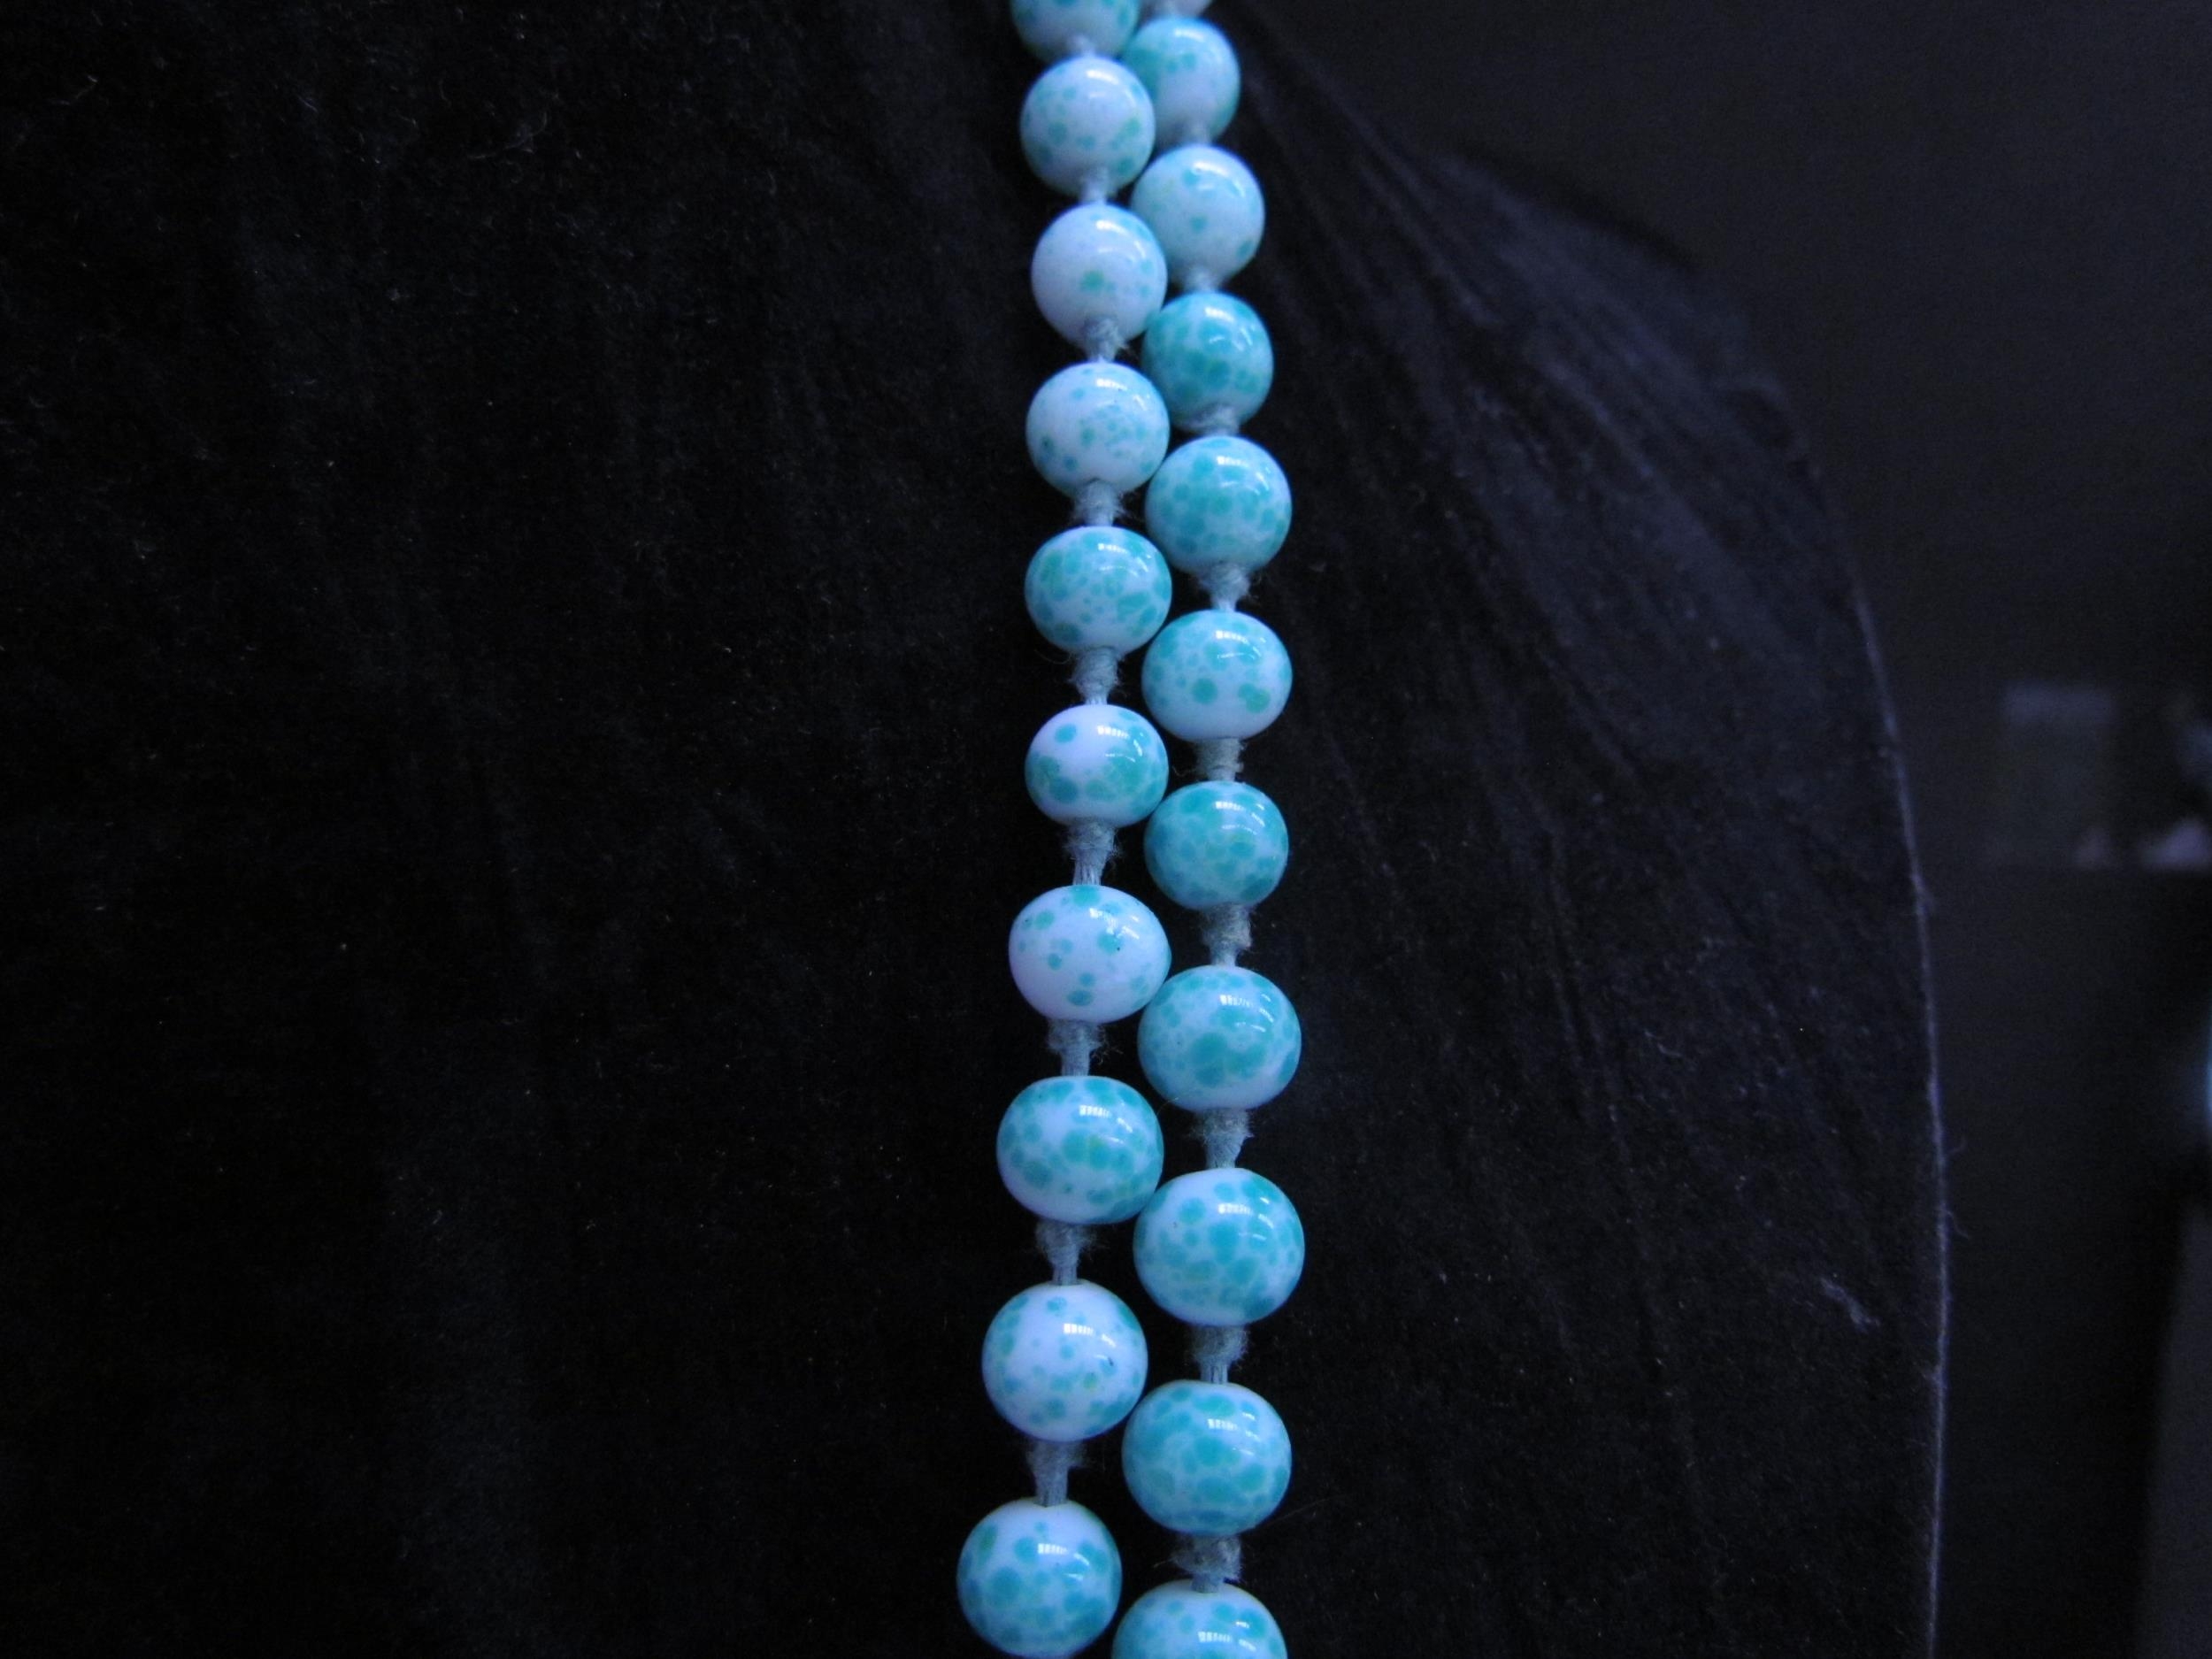 A speckled green bead necklace, 172cm long - Image 3 of 3